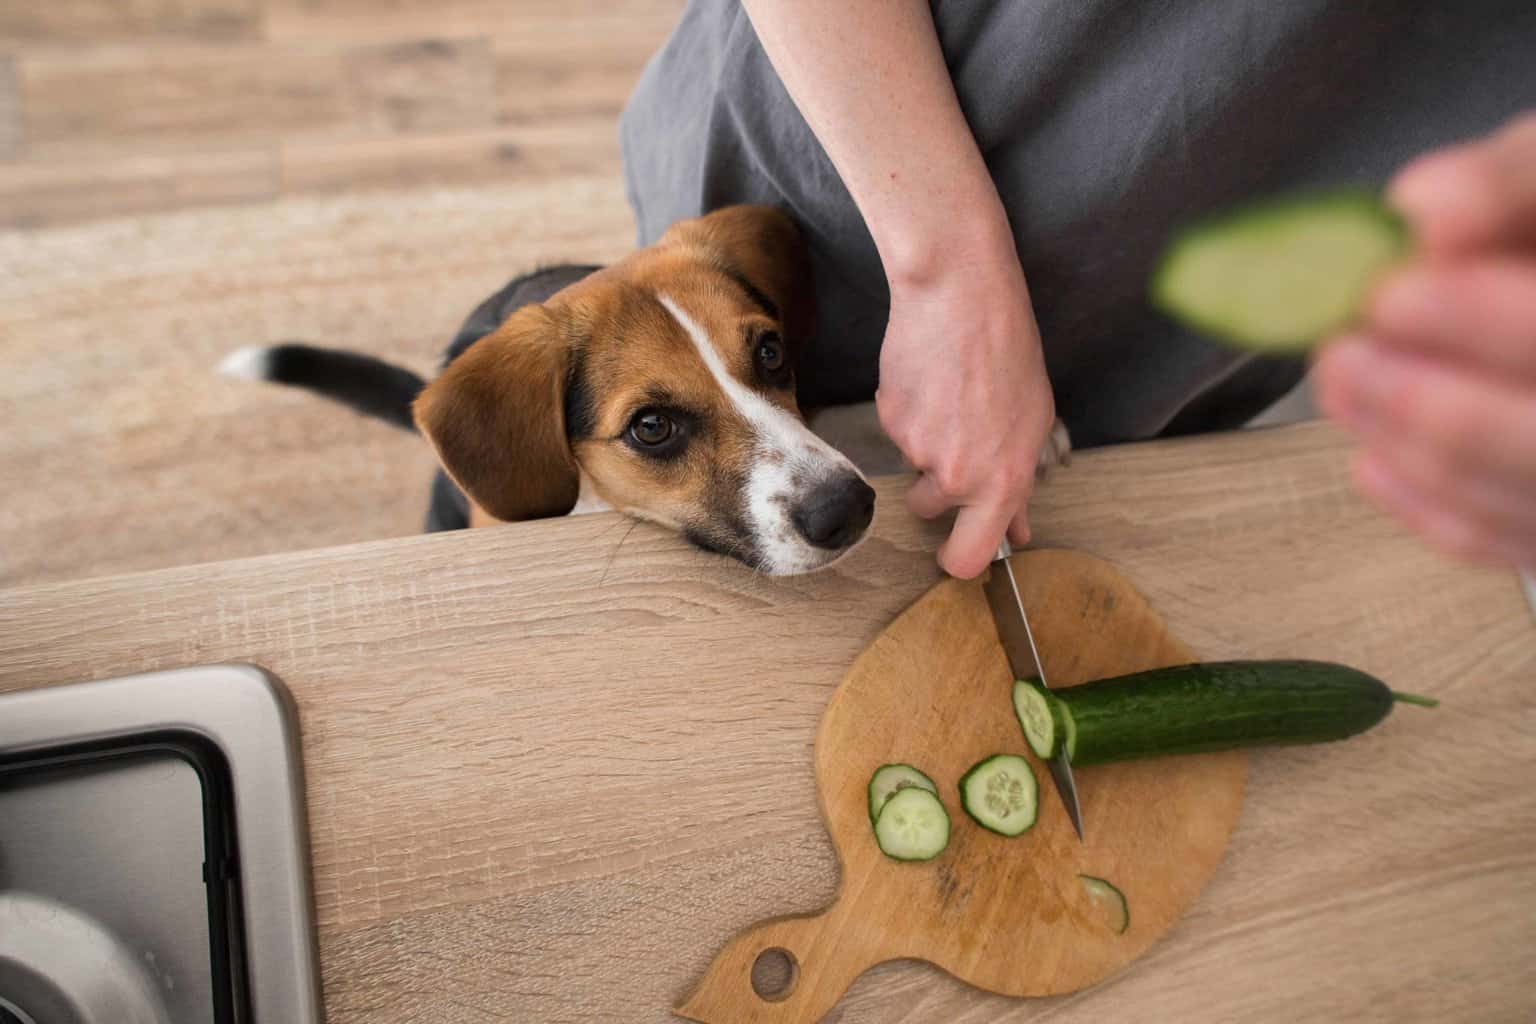 Beagle watches as owner slices up cucumbers. Cucumbers are a healthy and refreshing dog treat, but feeding them safely is essential.